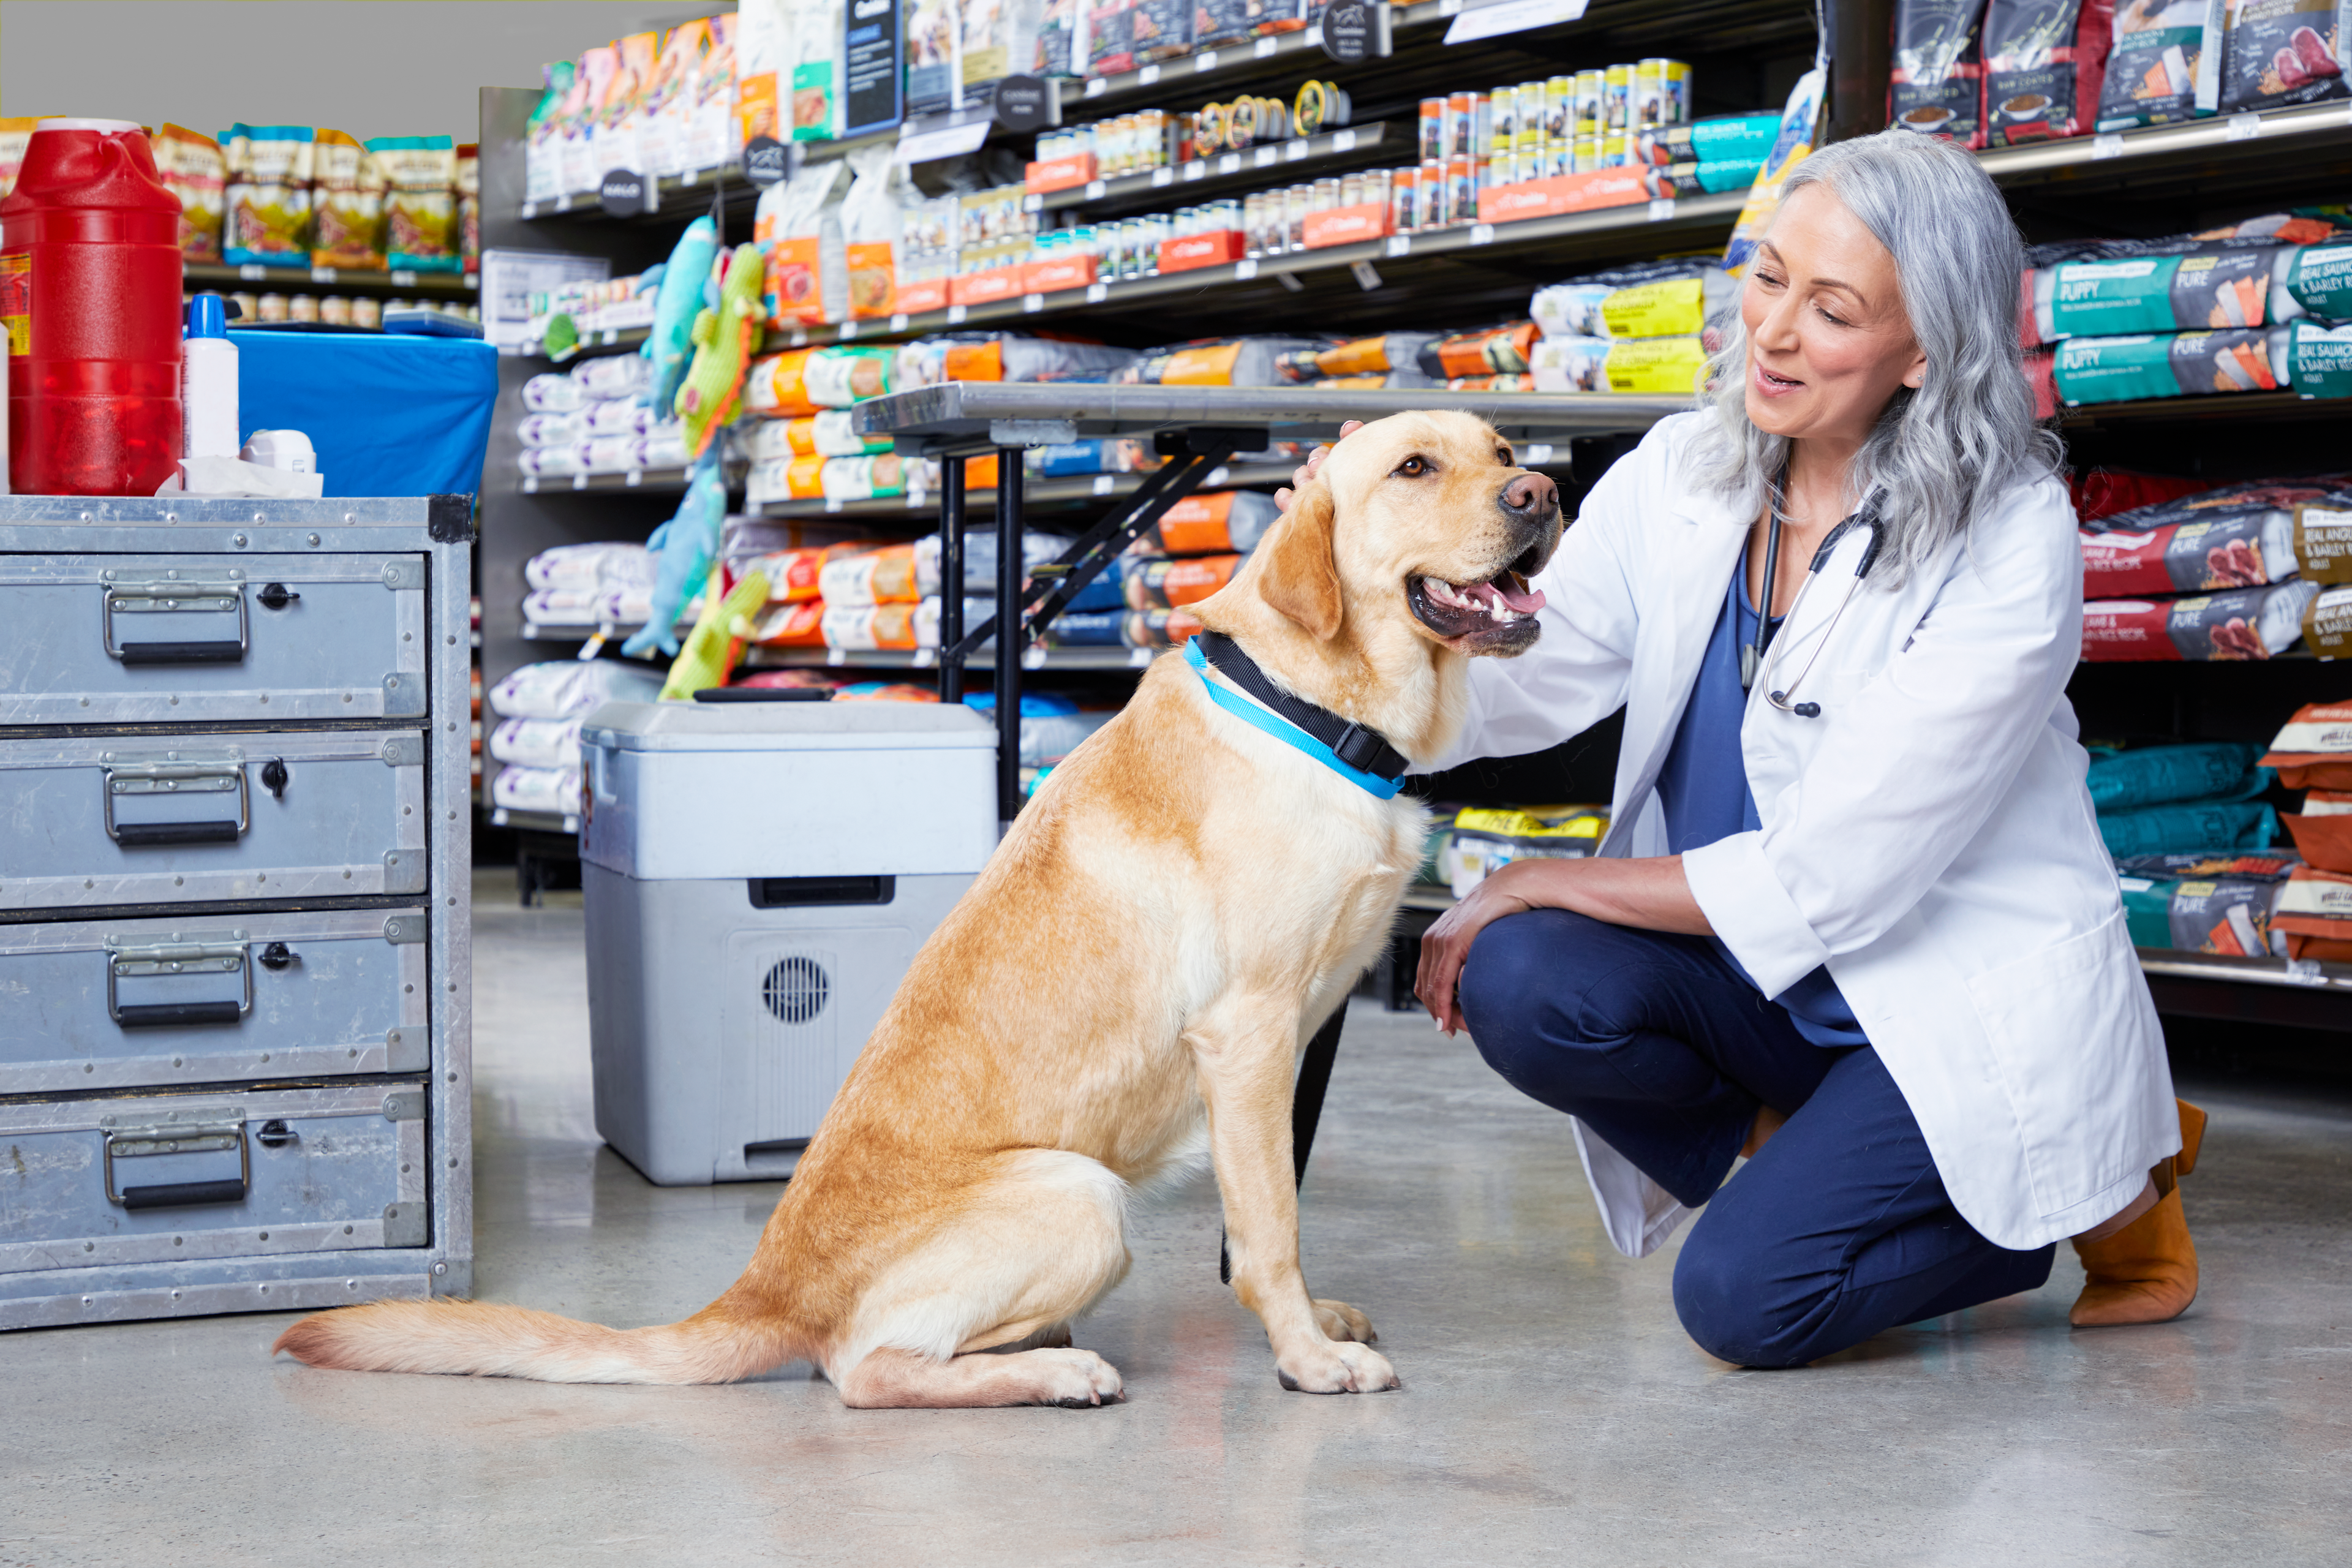 Petco and Nationwide partner for exclusive pet insurance offers